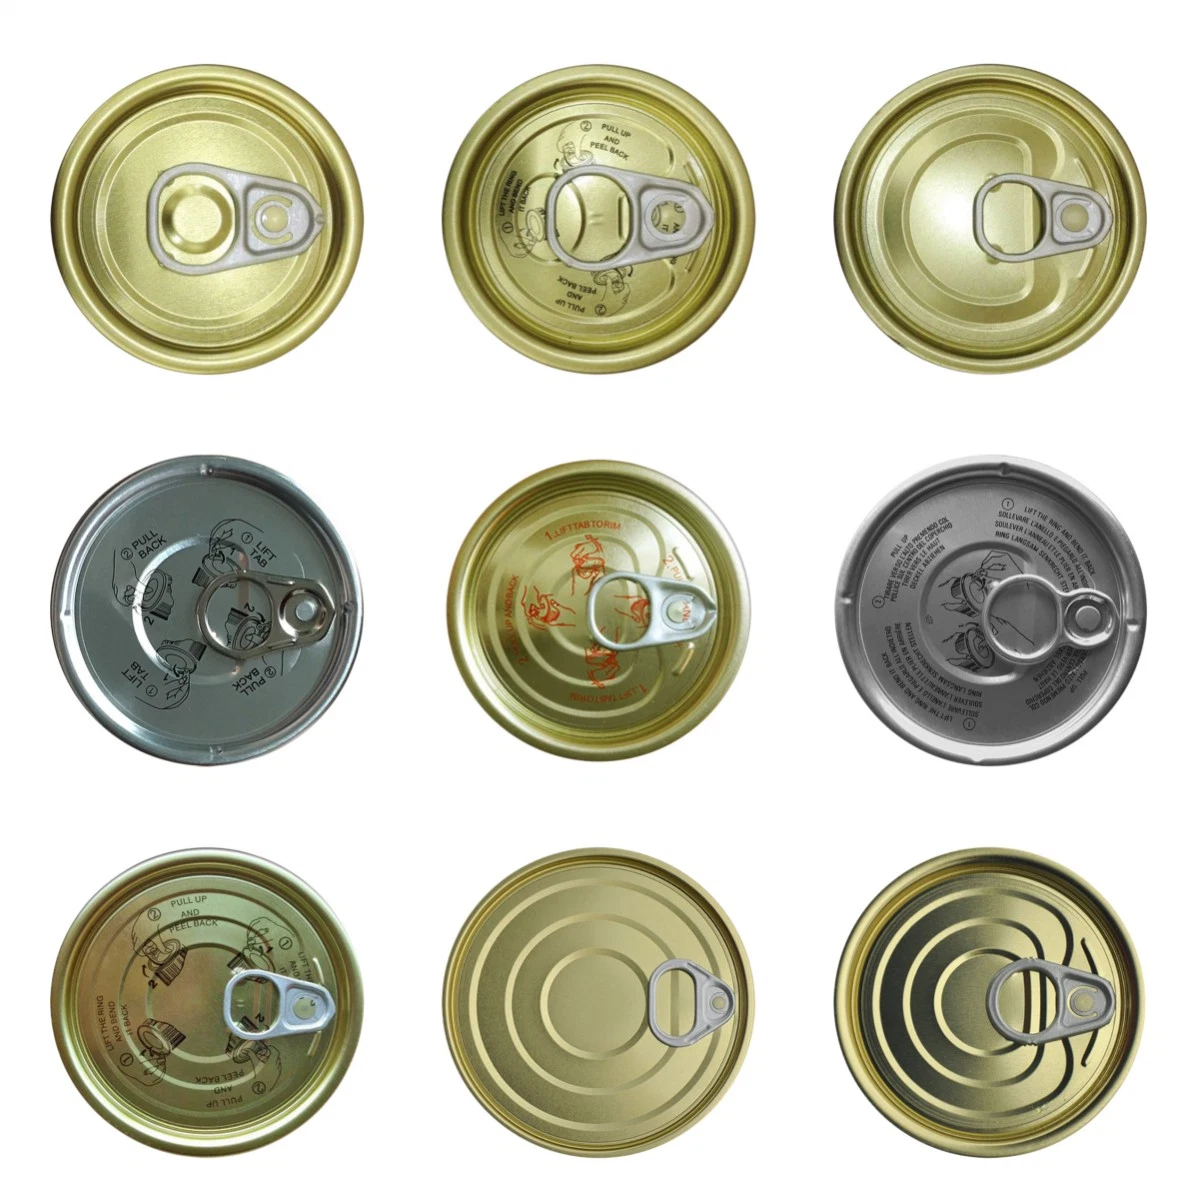 OEM Canned 73mm 300# Tinplate TFS Eoe Metal Tin Can Lid Cover Cap ETP Round Tin Can Lids Easy Open Ends for Sale